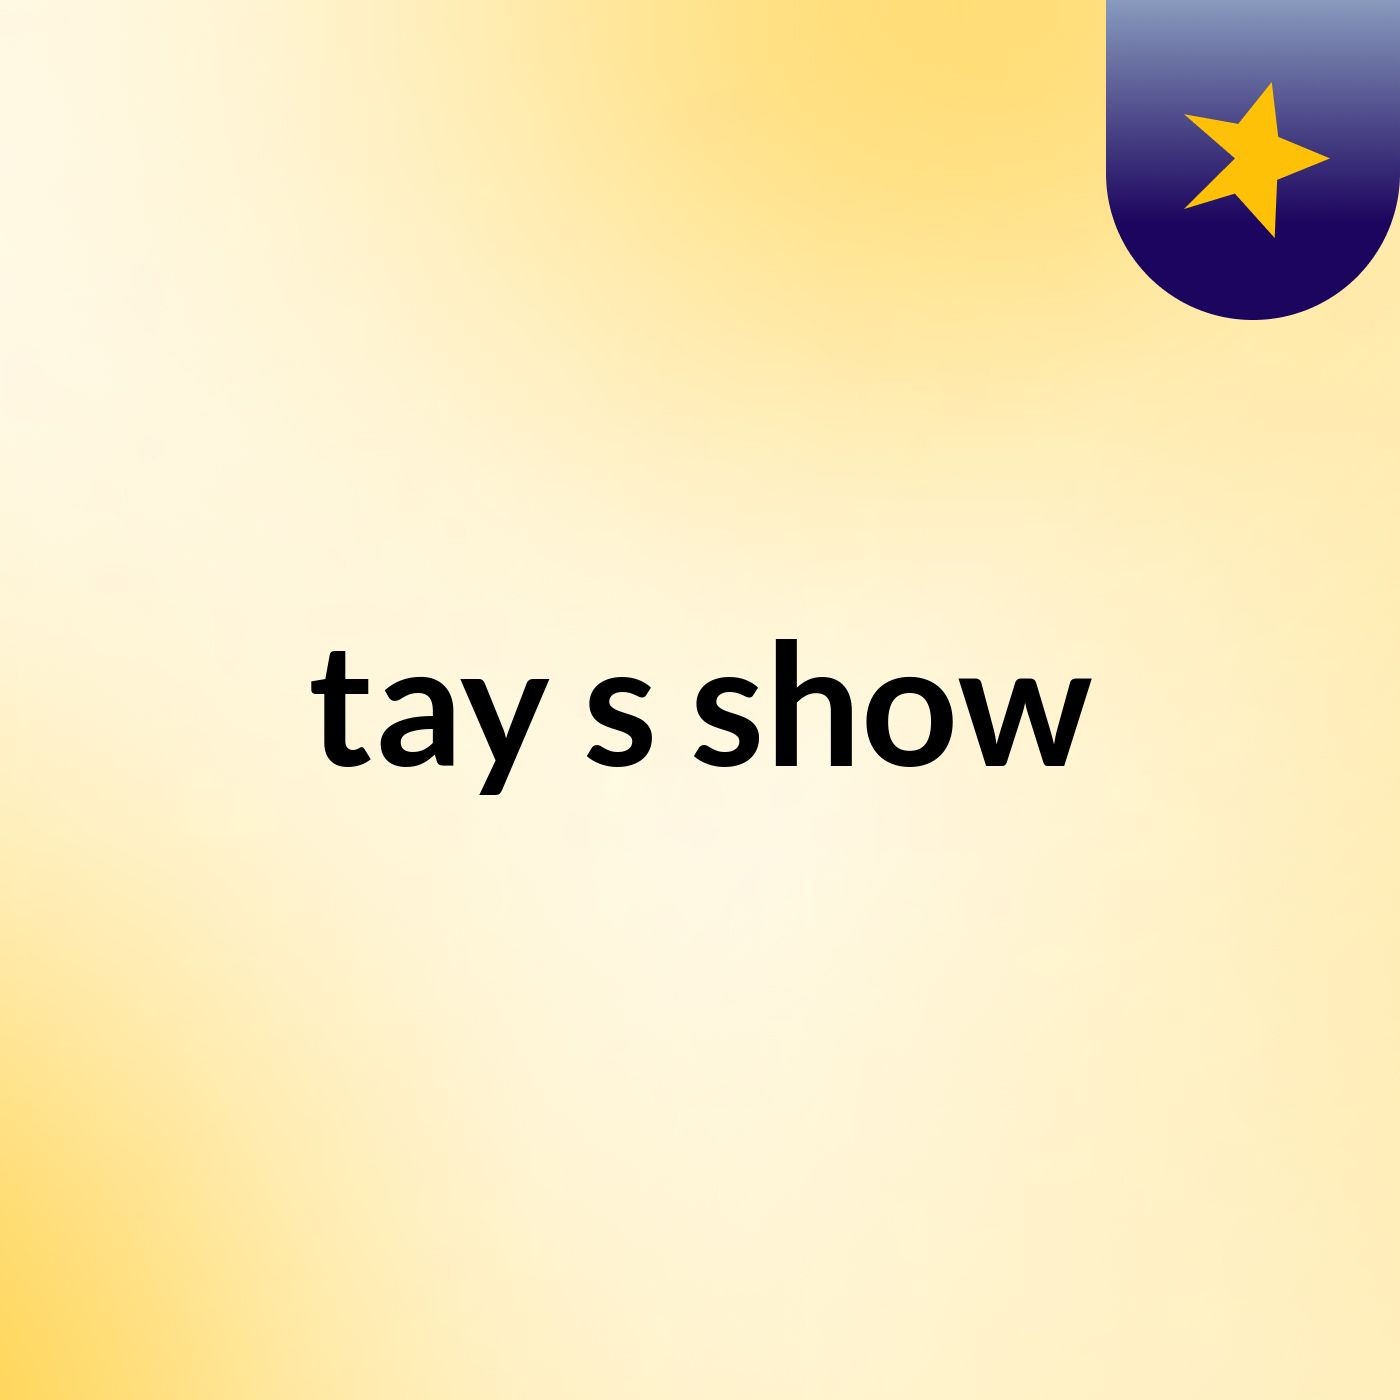 tay's show